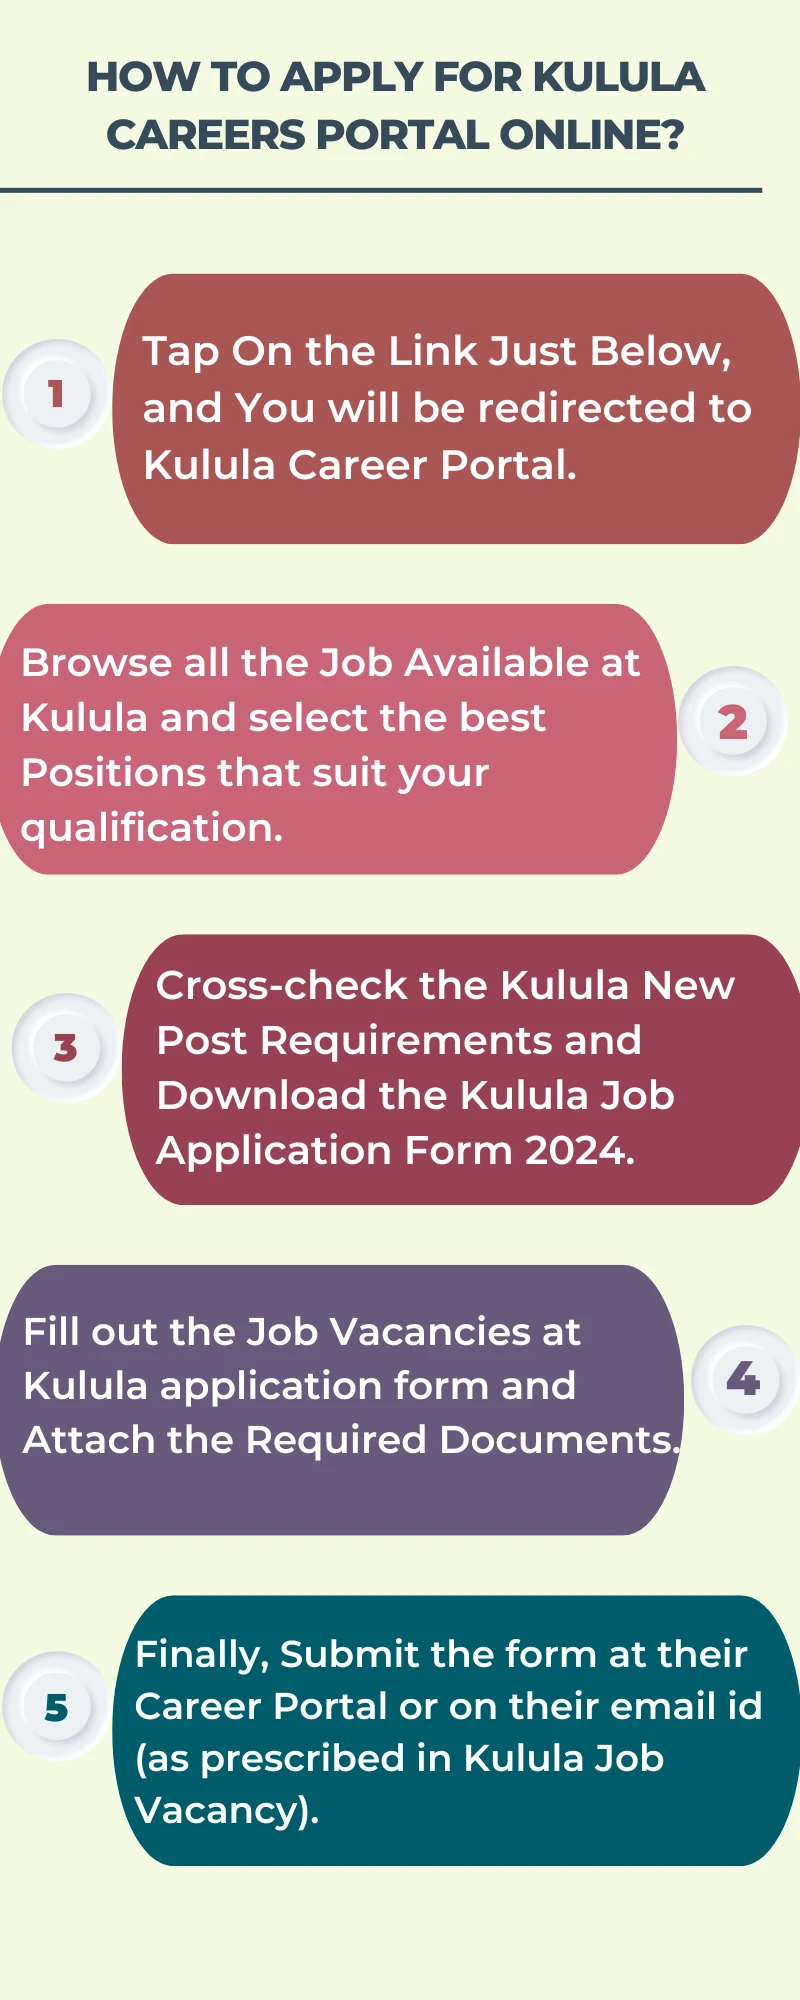 How To Apply for Kulula Careers Portal Online?